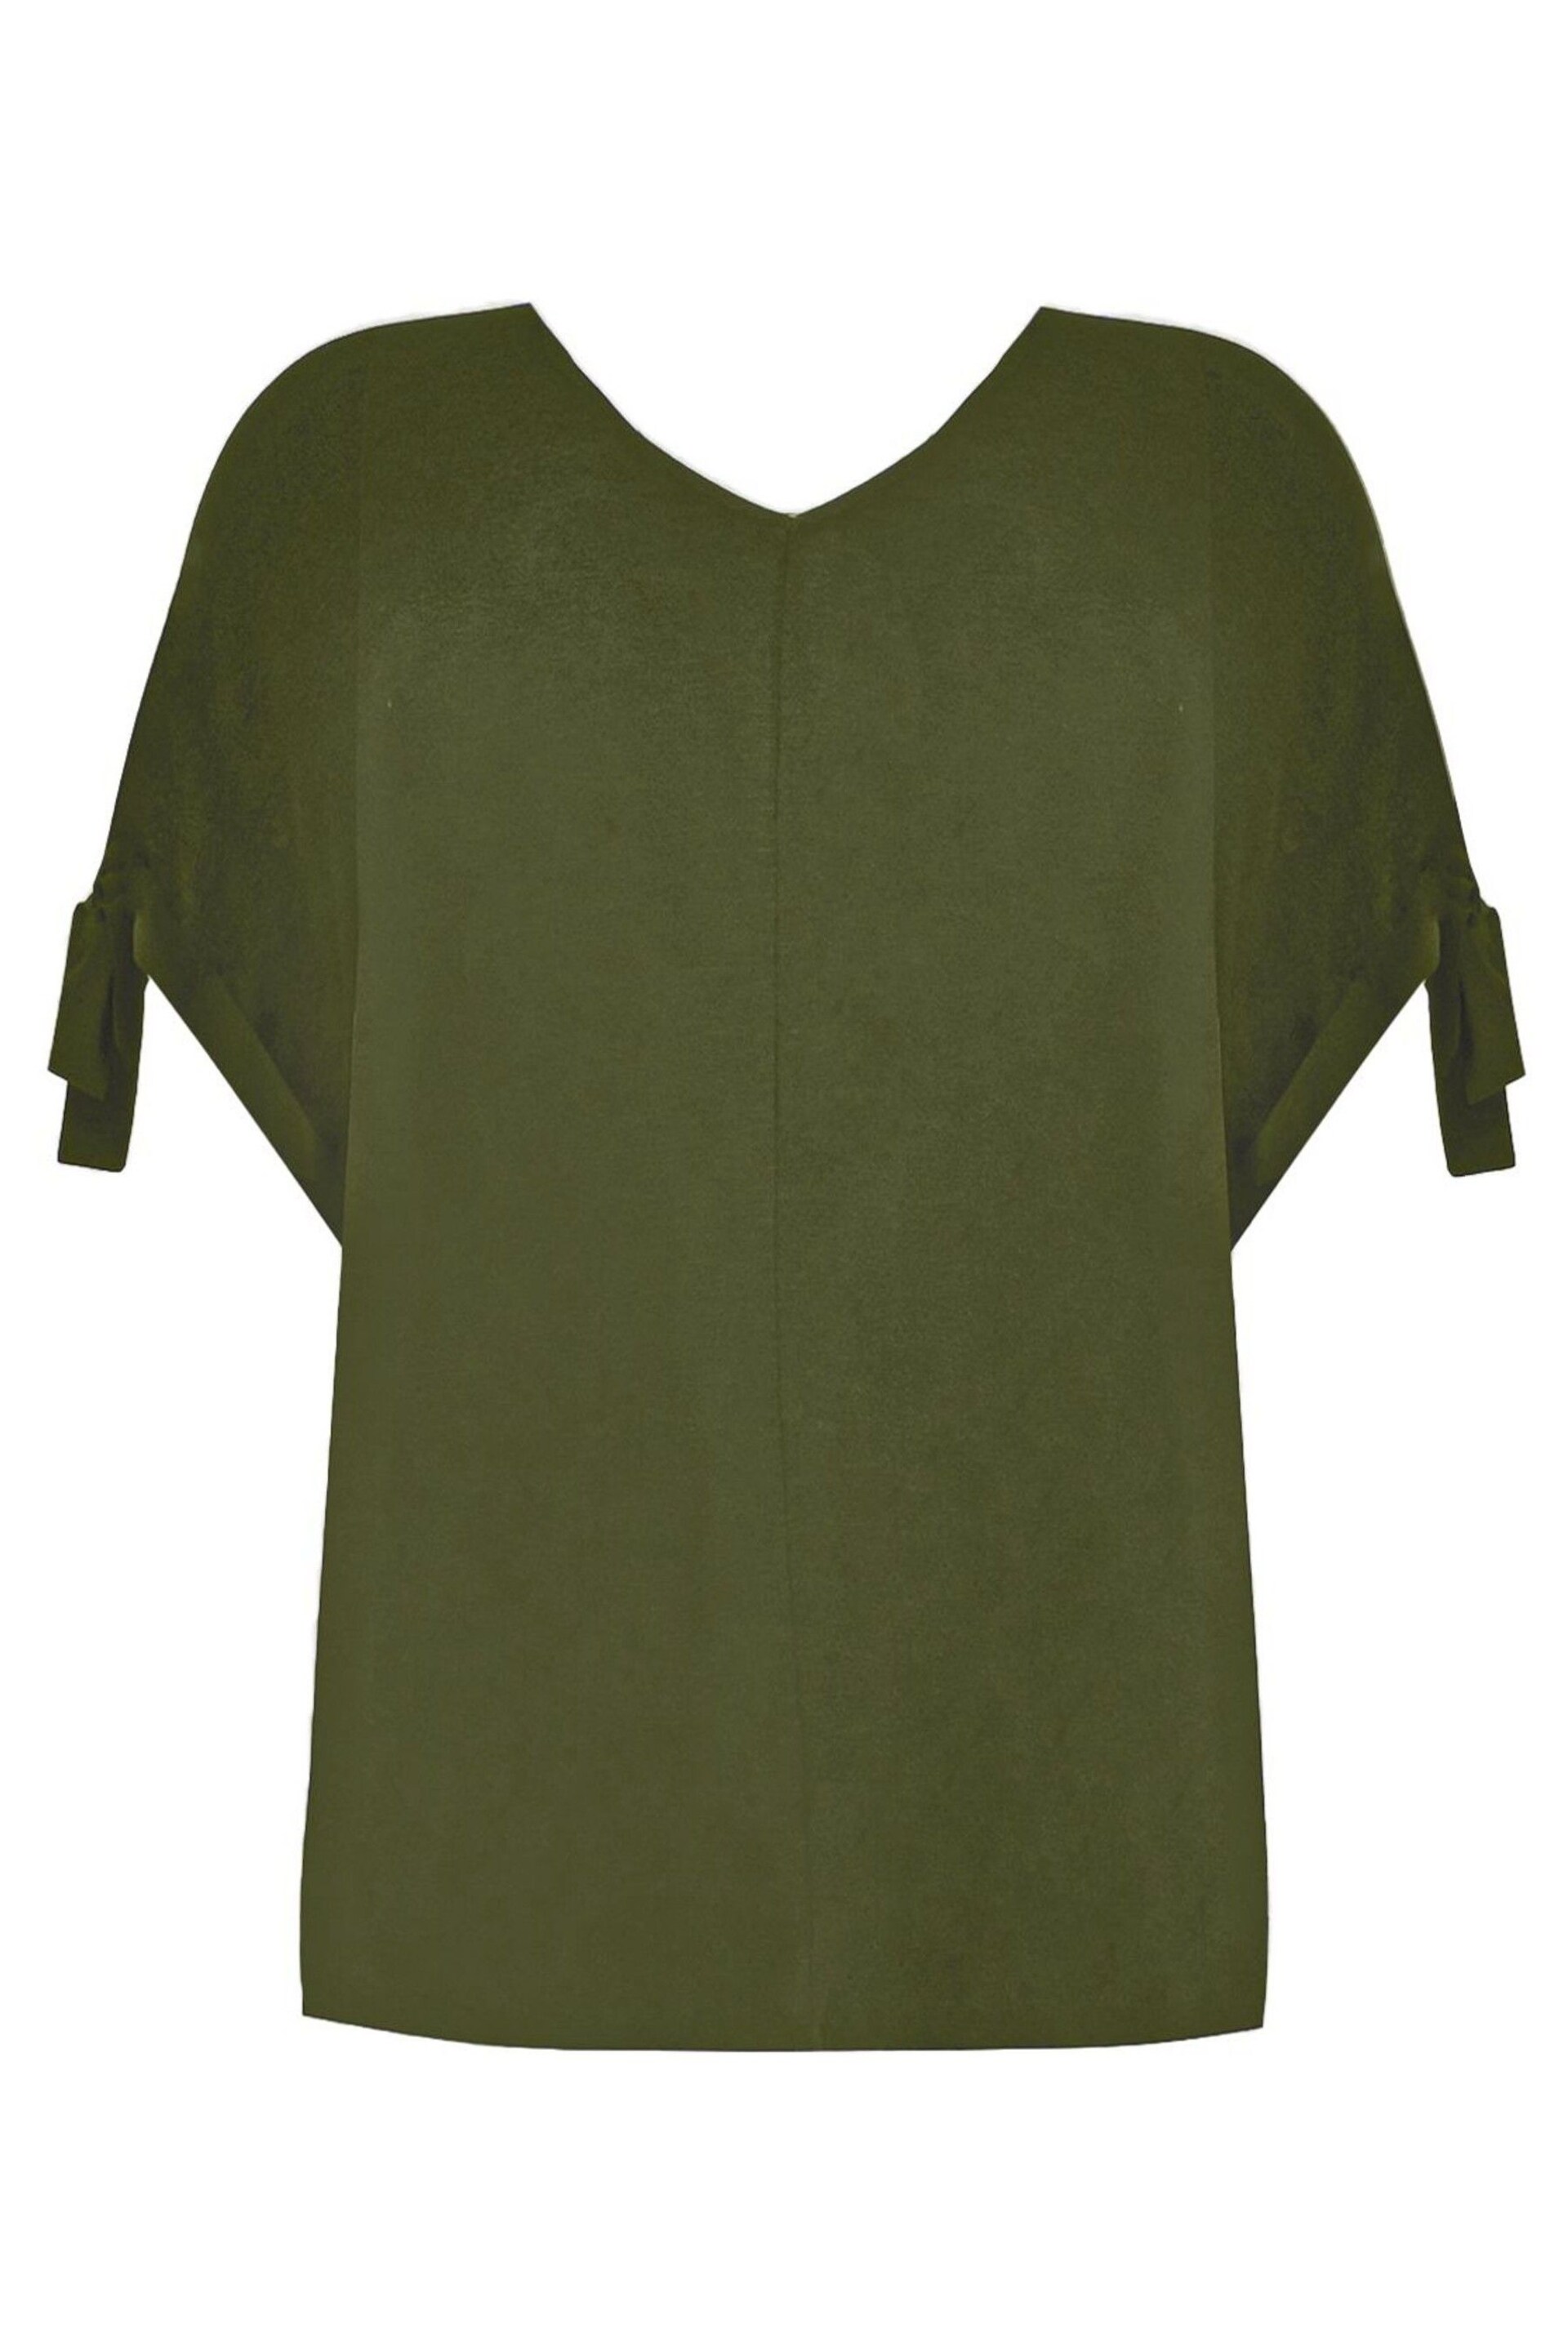 Live Unlimited Curve -Khaki Green Viscose Texture Tie Sleeve Top - Image 4 of 4